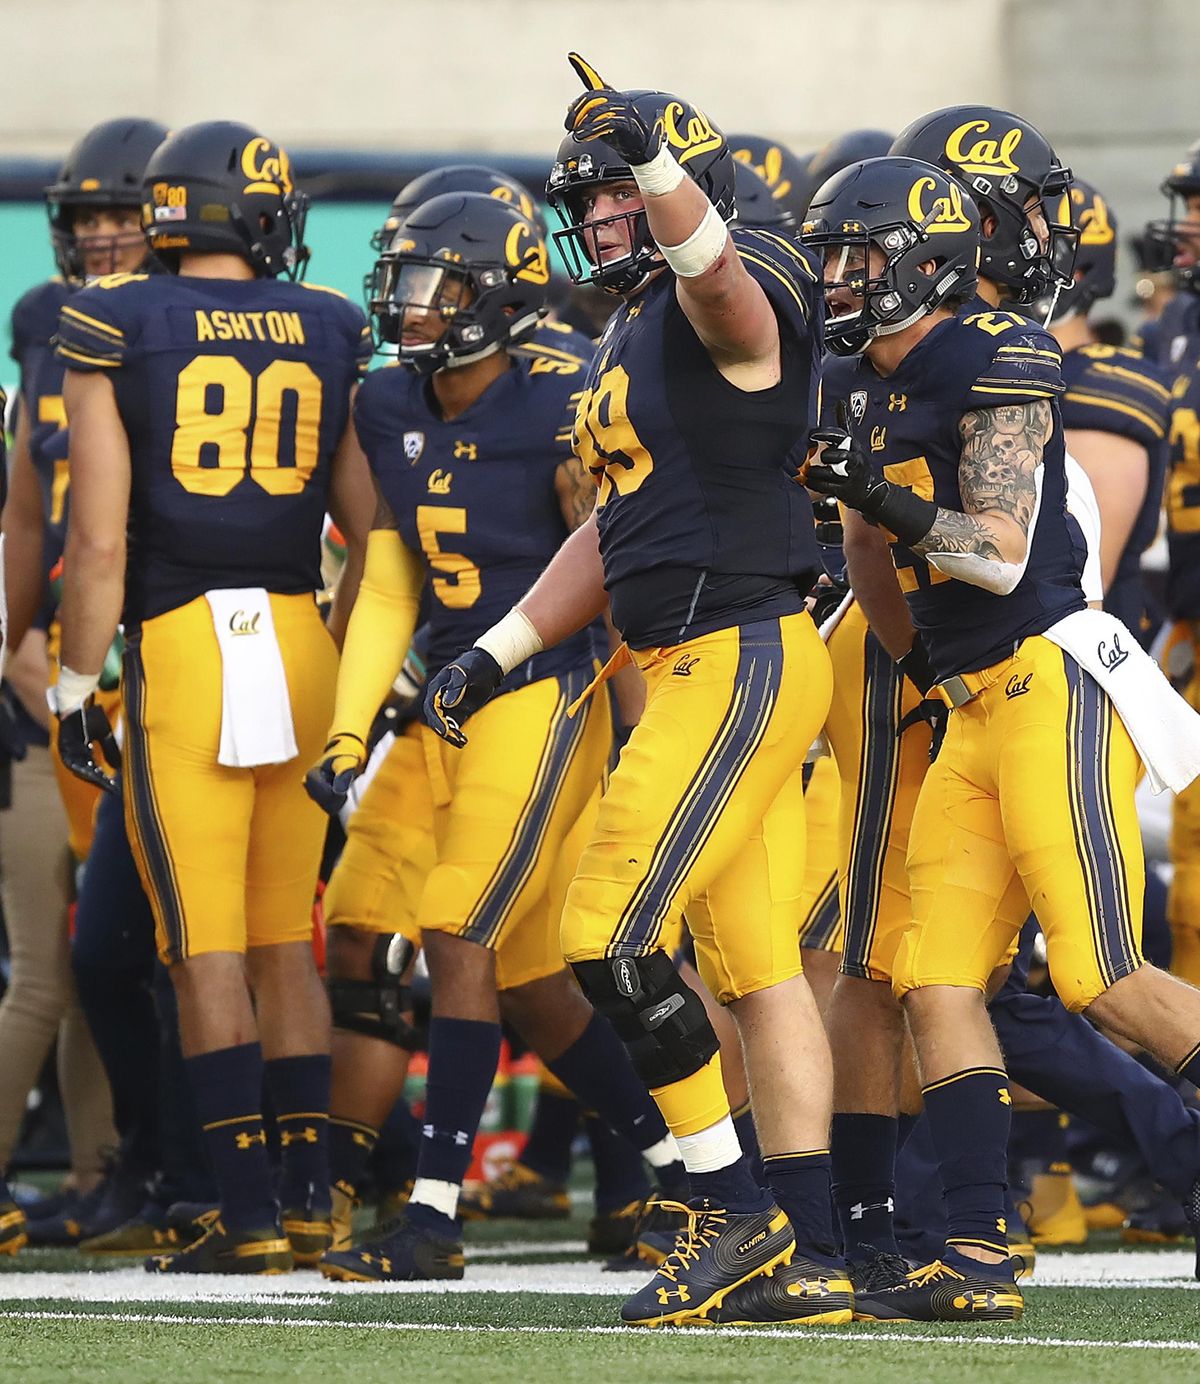 California’s Evan Weaver  celebrates after intercepting a pass against Washington for a touchdown during the second half last Saturday in Berkeley, Calif. (Ben Margot / AP)